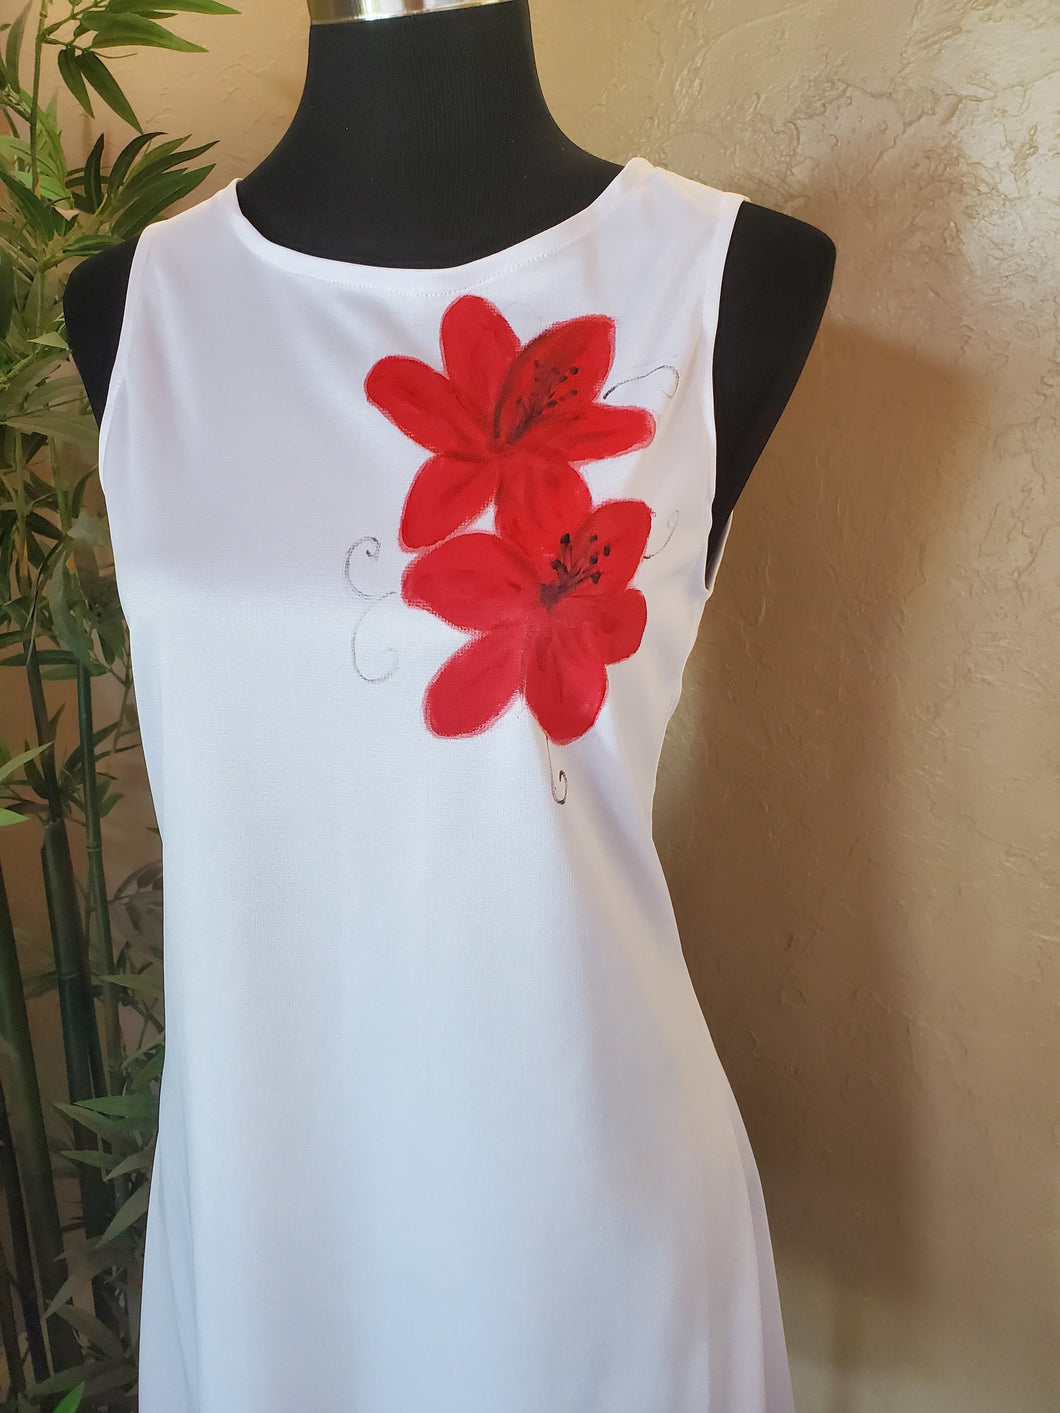 Red flowers on white dress